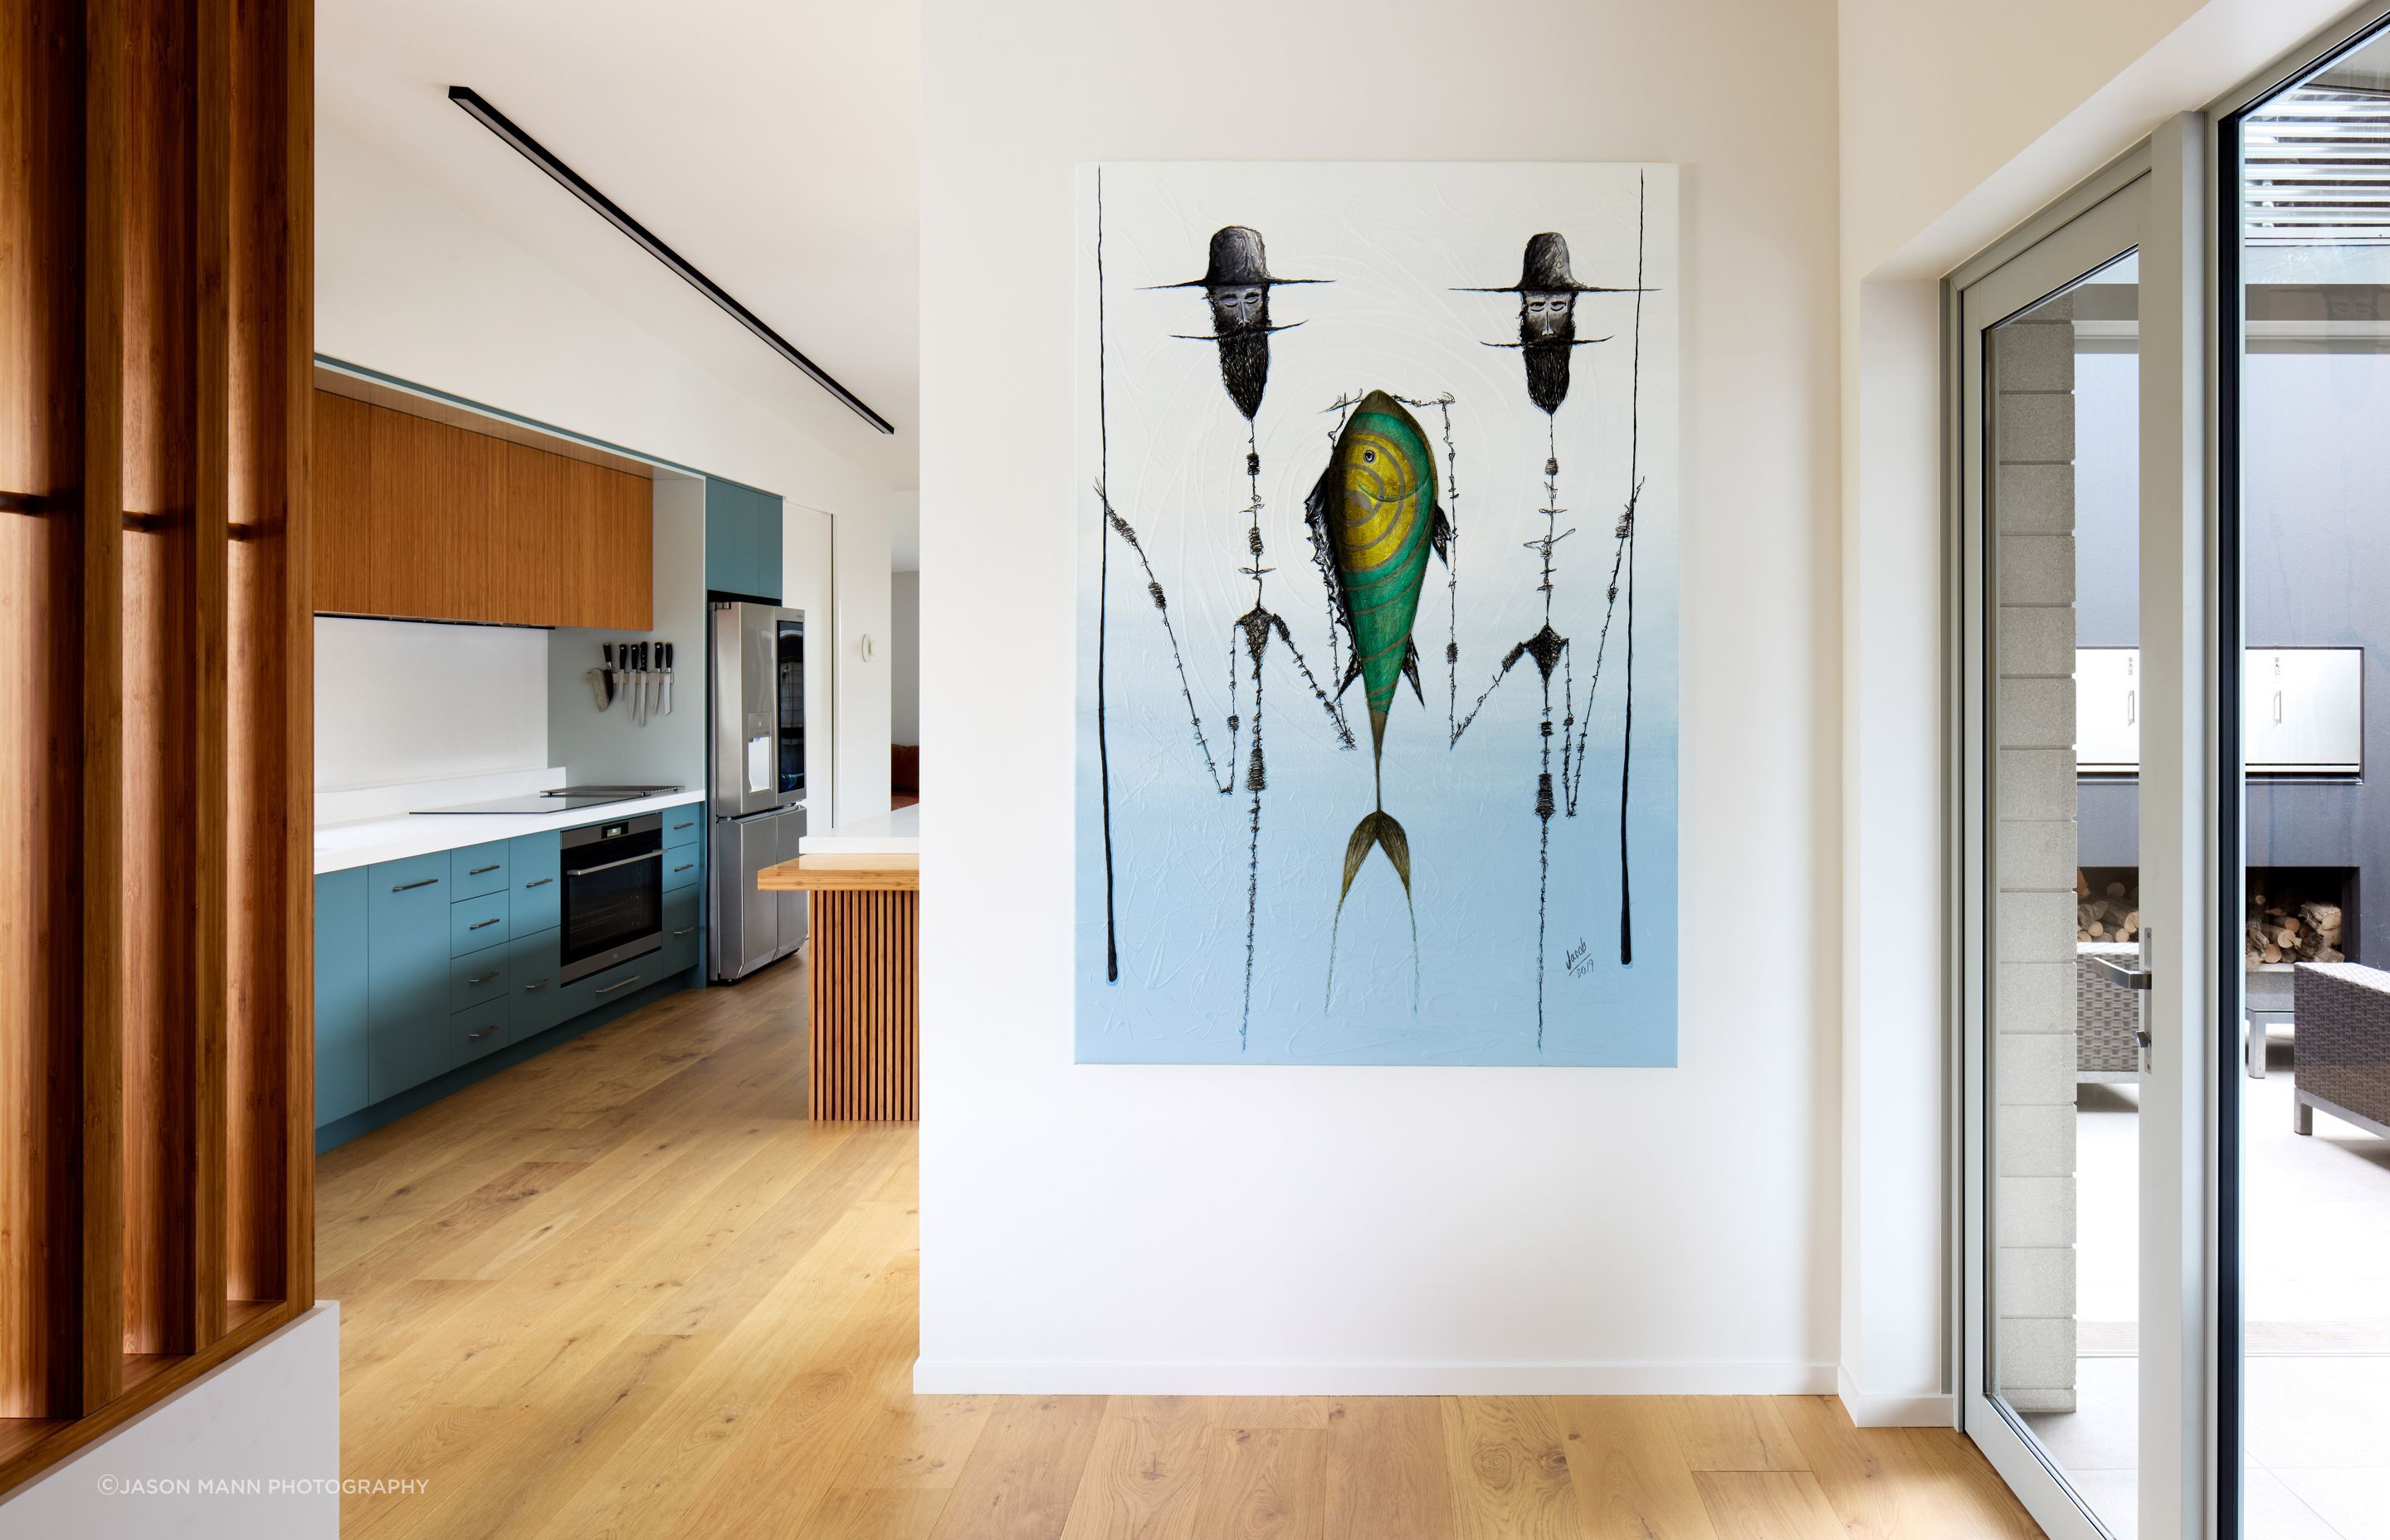 The homeowners are art collectors. “The painting on the wall at the front entrance was picked up from a street artist in Mexico. It’s a favourite piece and an important part of the house,” says Nick.